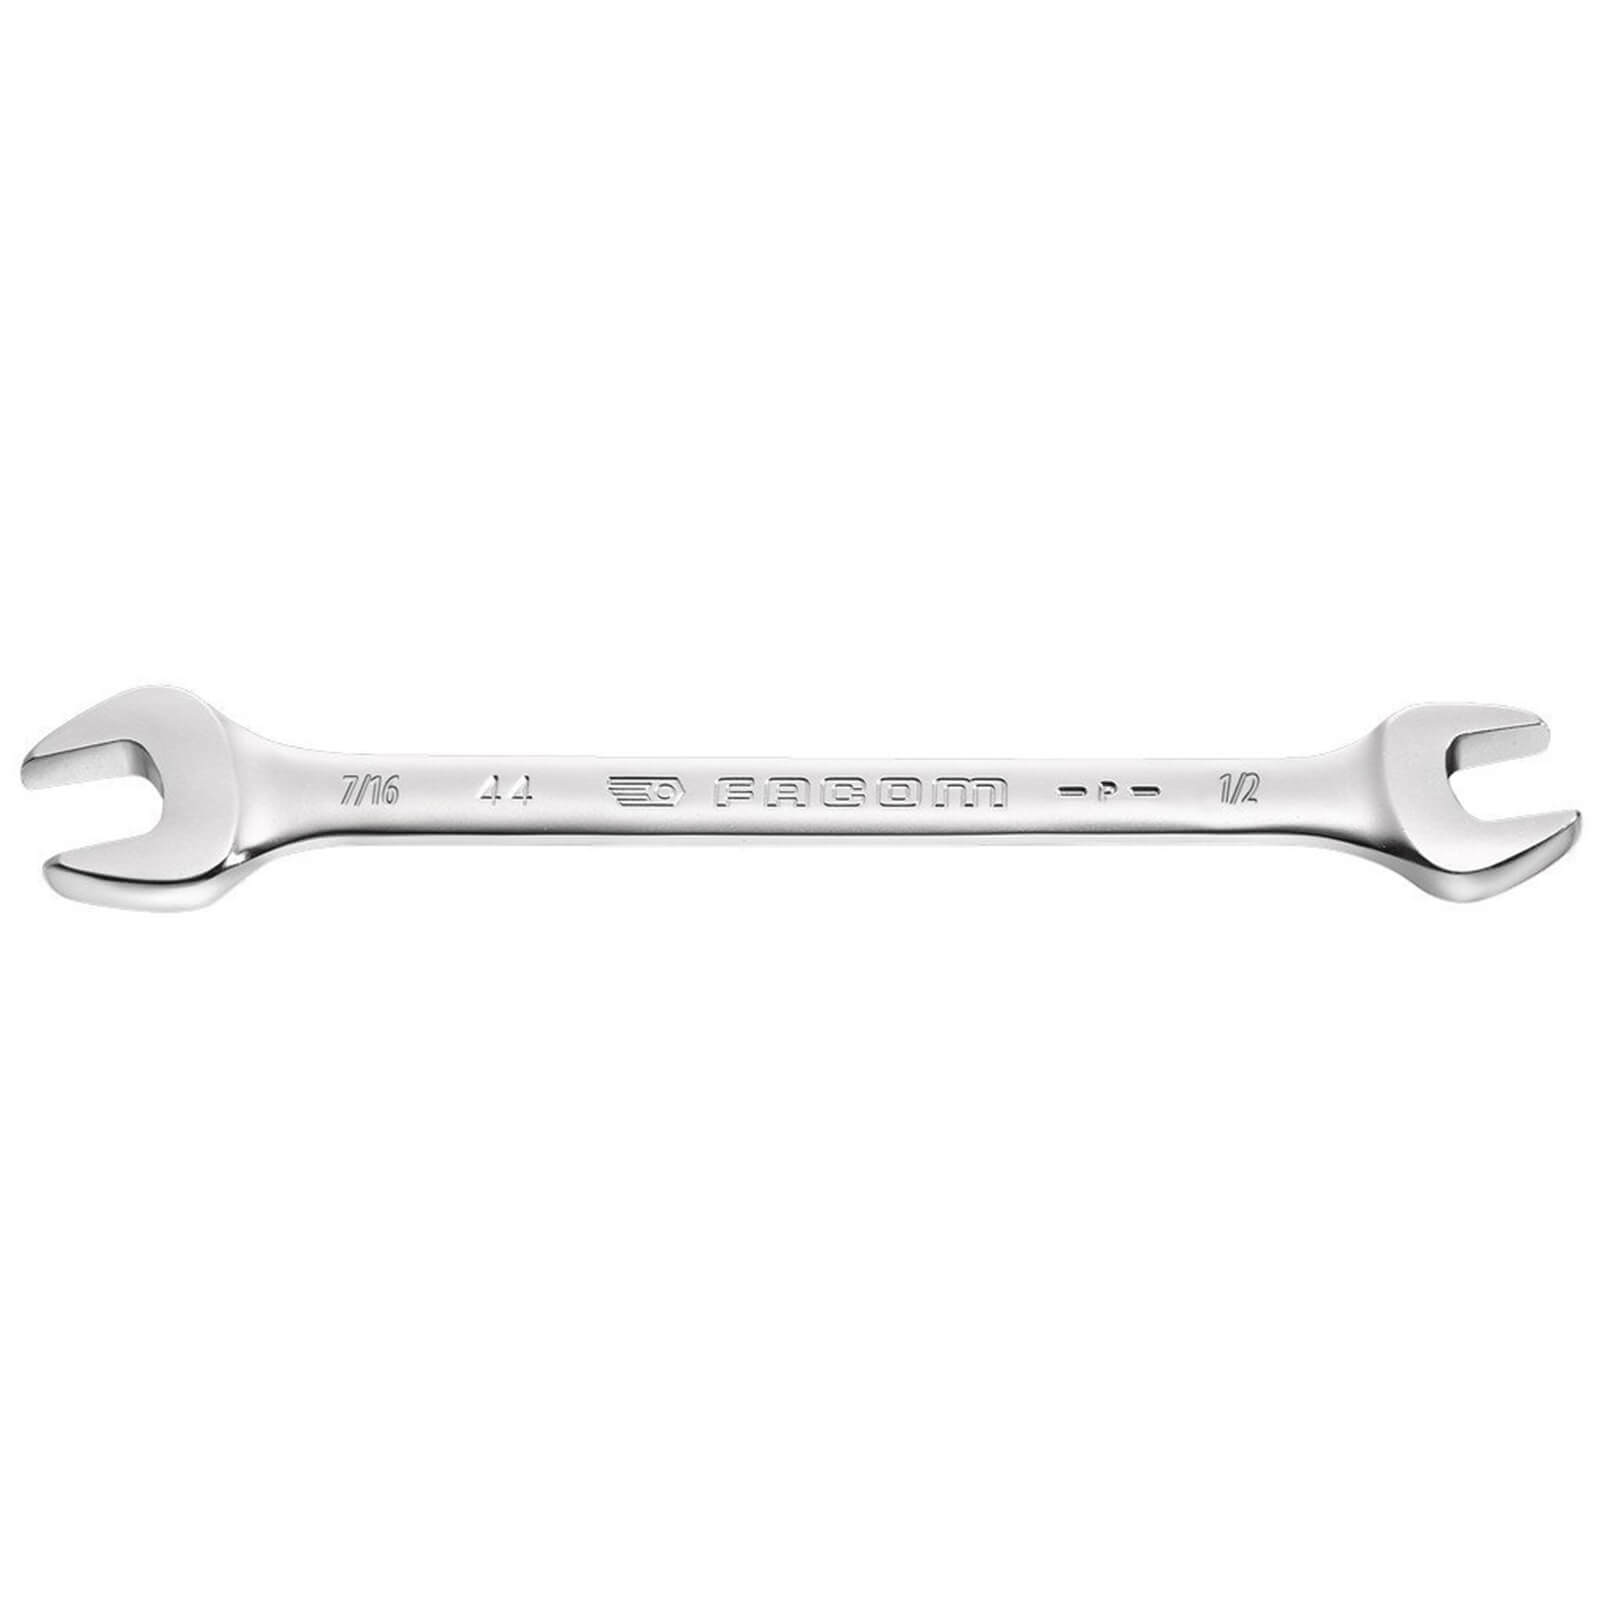 Image of Facom Open Ended Spanner Imperial 1 1/18" x 1 1/14"